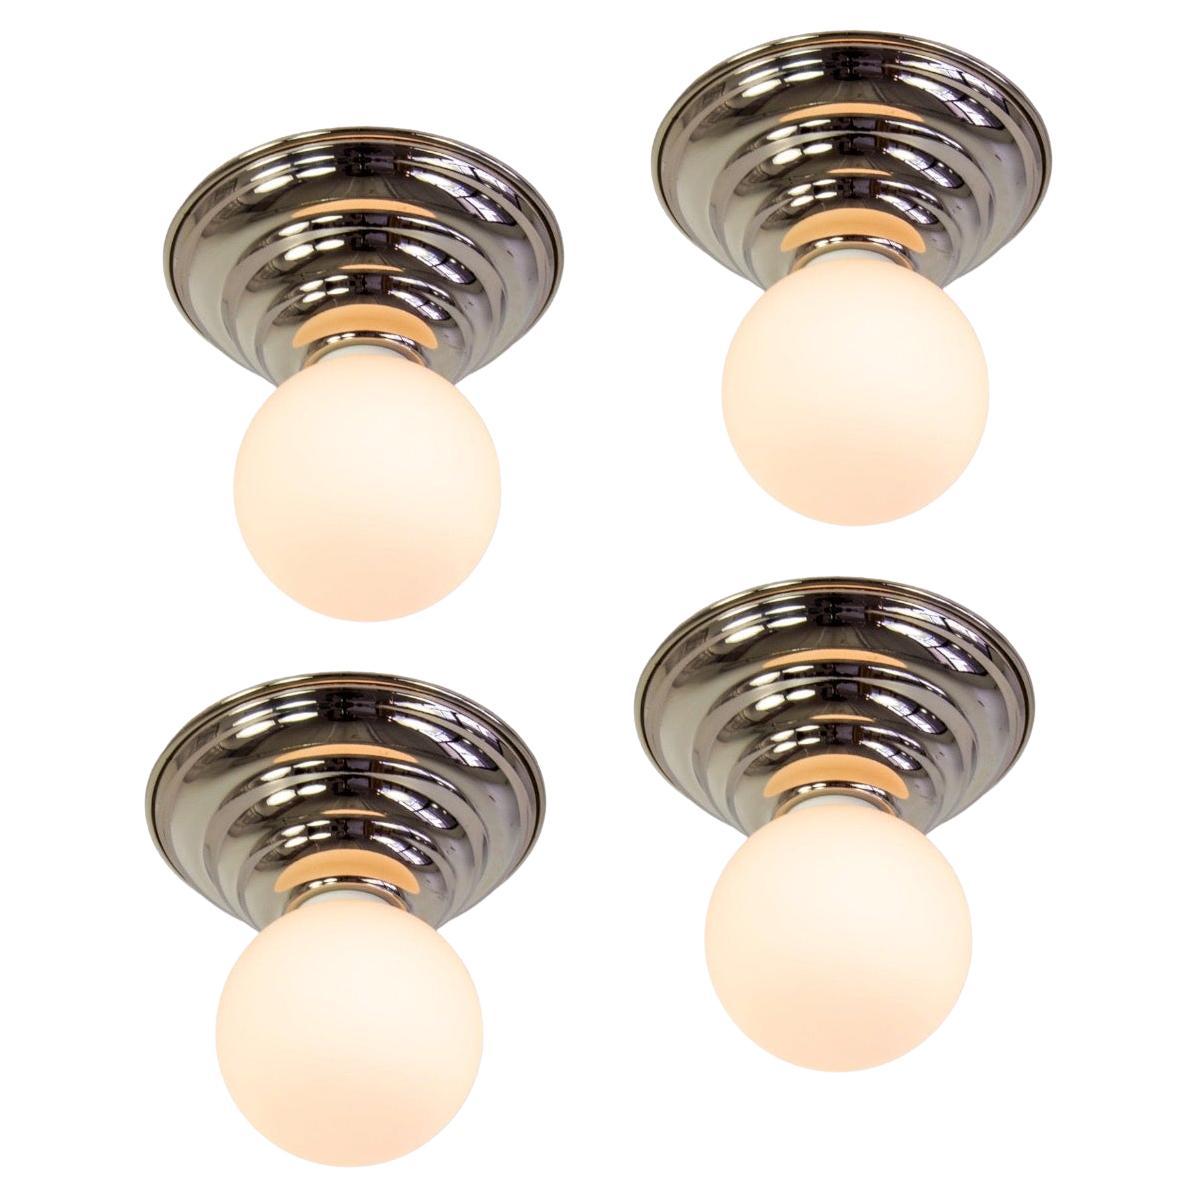 Set of 4 Hive Flush Mounts by Research.Lighting, Polished Nickel, Made to Order For Sale